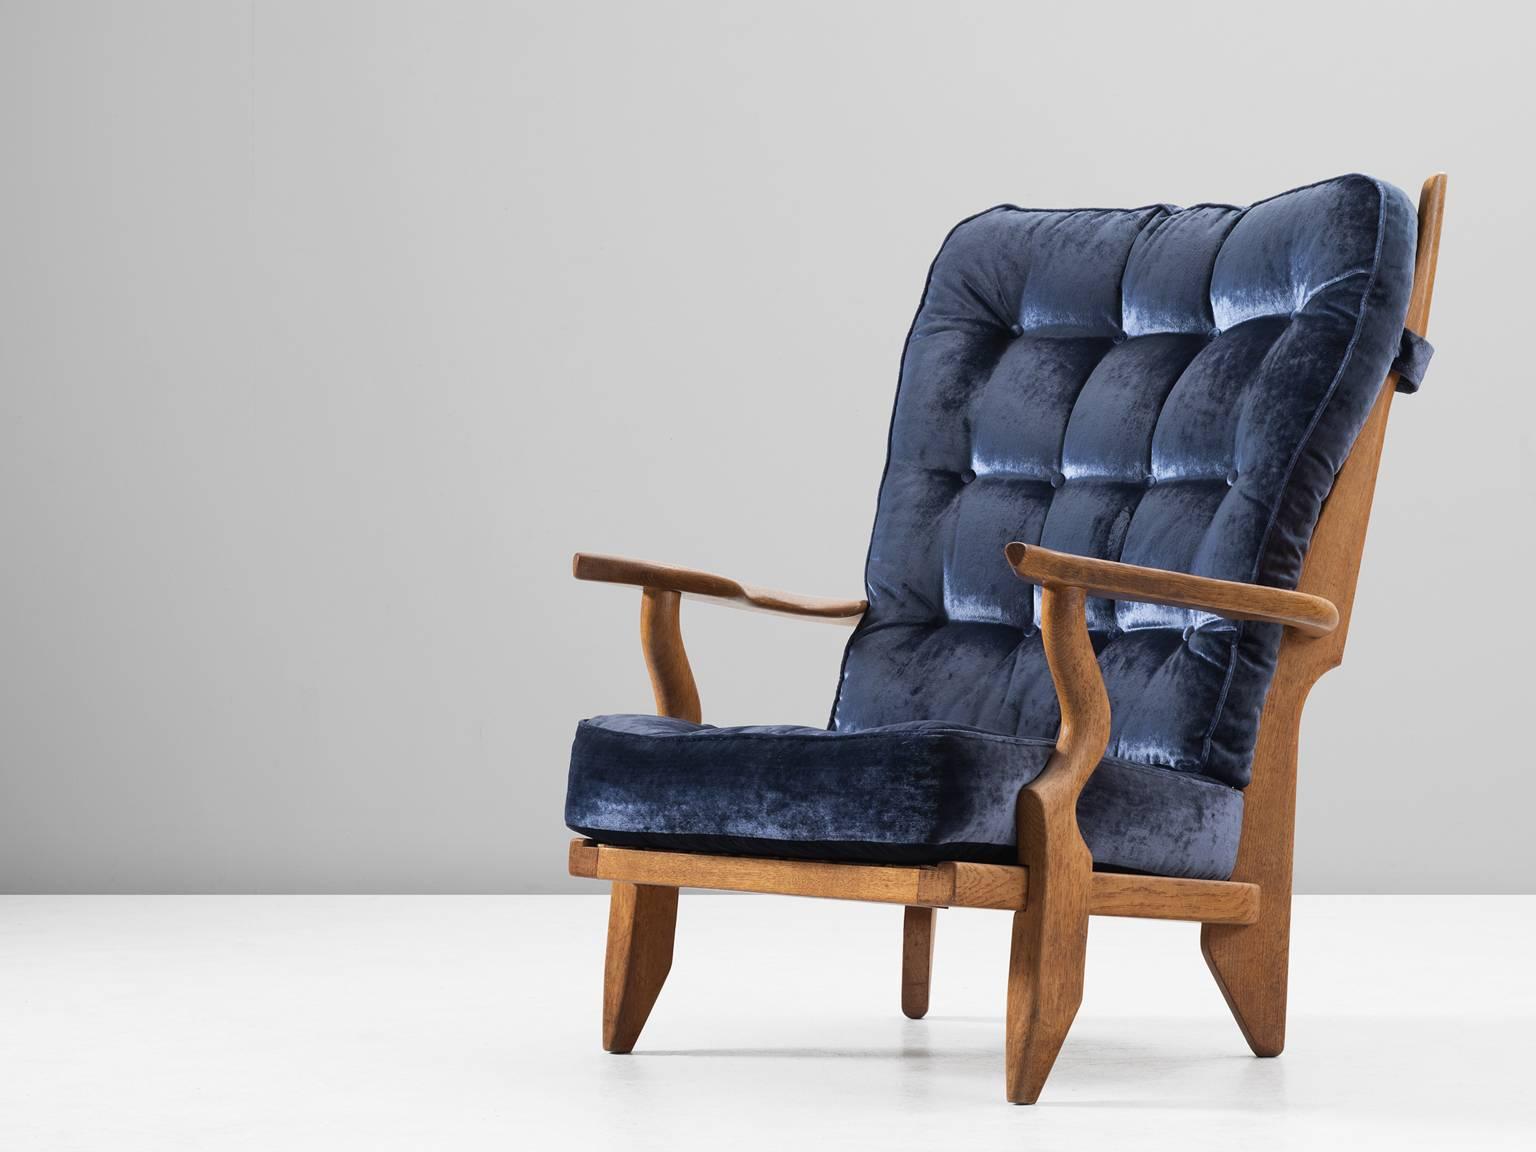 'Grand Repos' lounge chair, in oak and fabric, by Guillerme et Chambron, France 1960.

Extraordinary Guillerme & Chambron high back lounge chair, in solid oak with the typical characteristic decorative details at the back and capricious forms of the